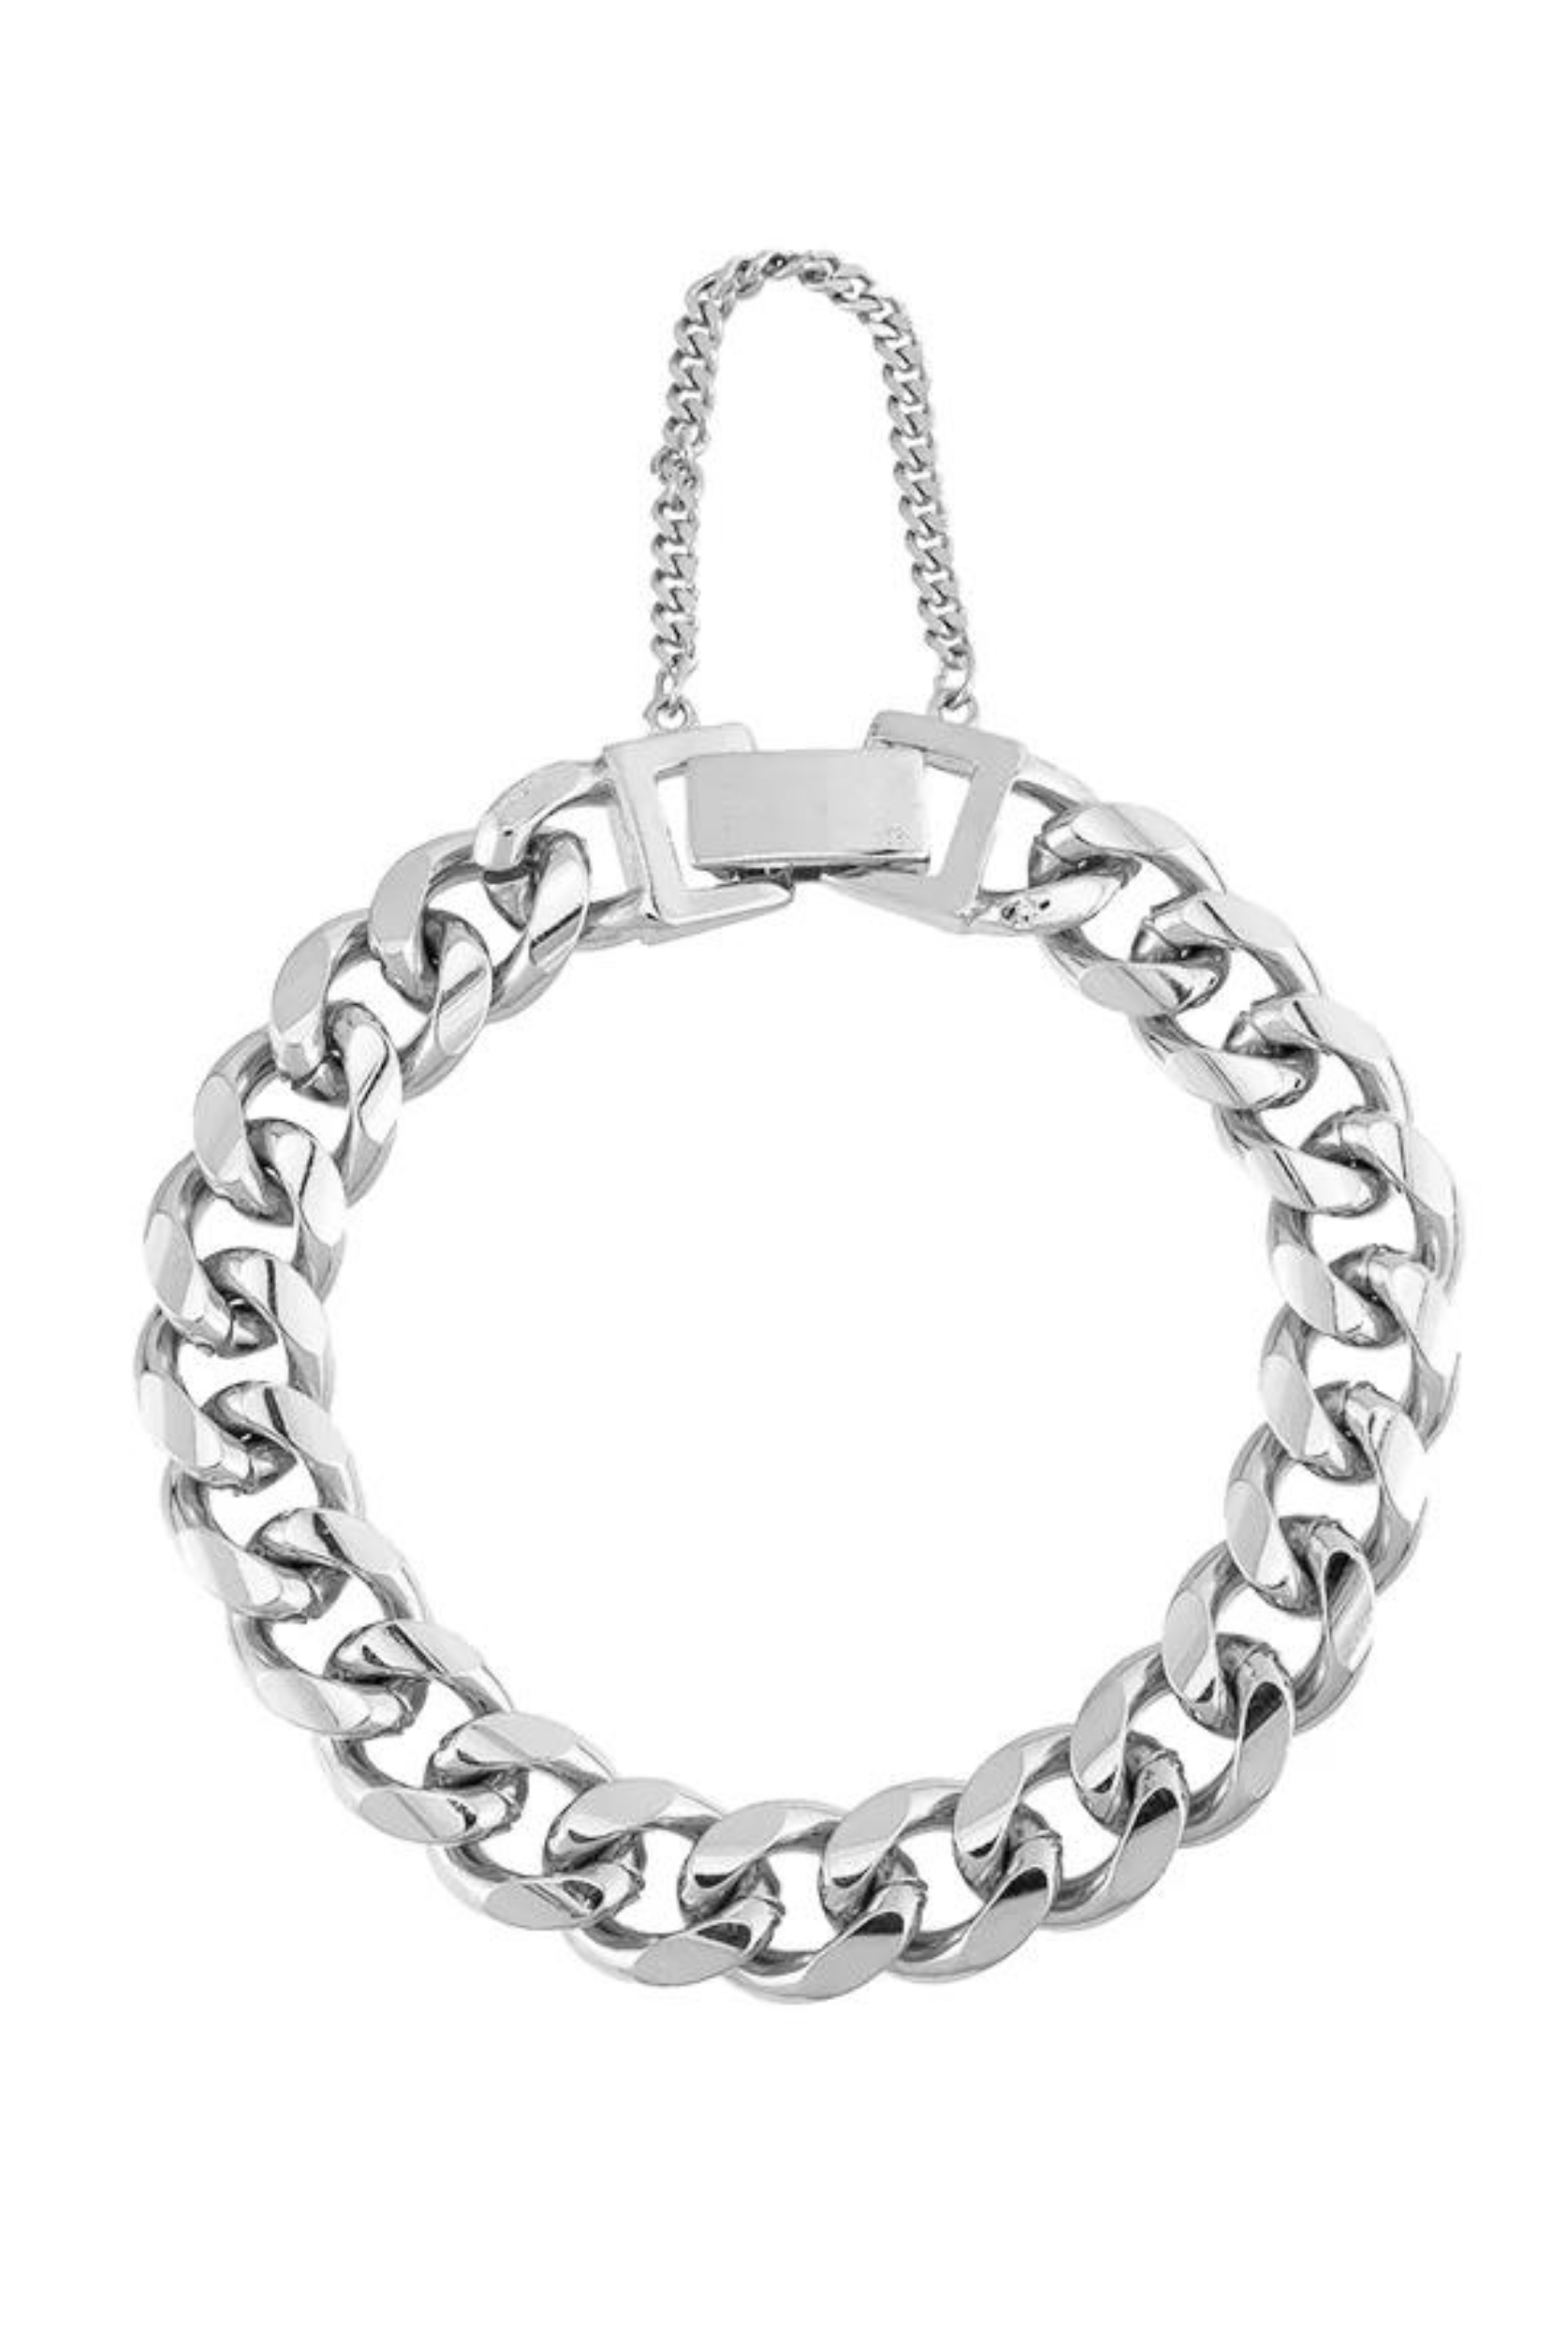 Colette bracelet in silver from Jolie and Deen